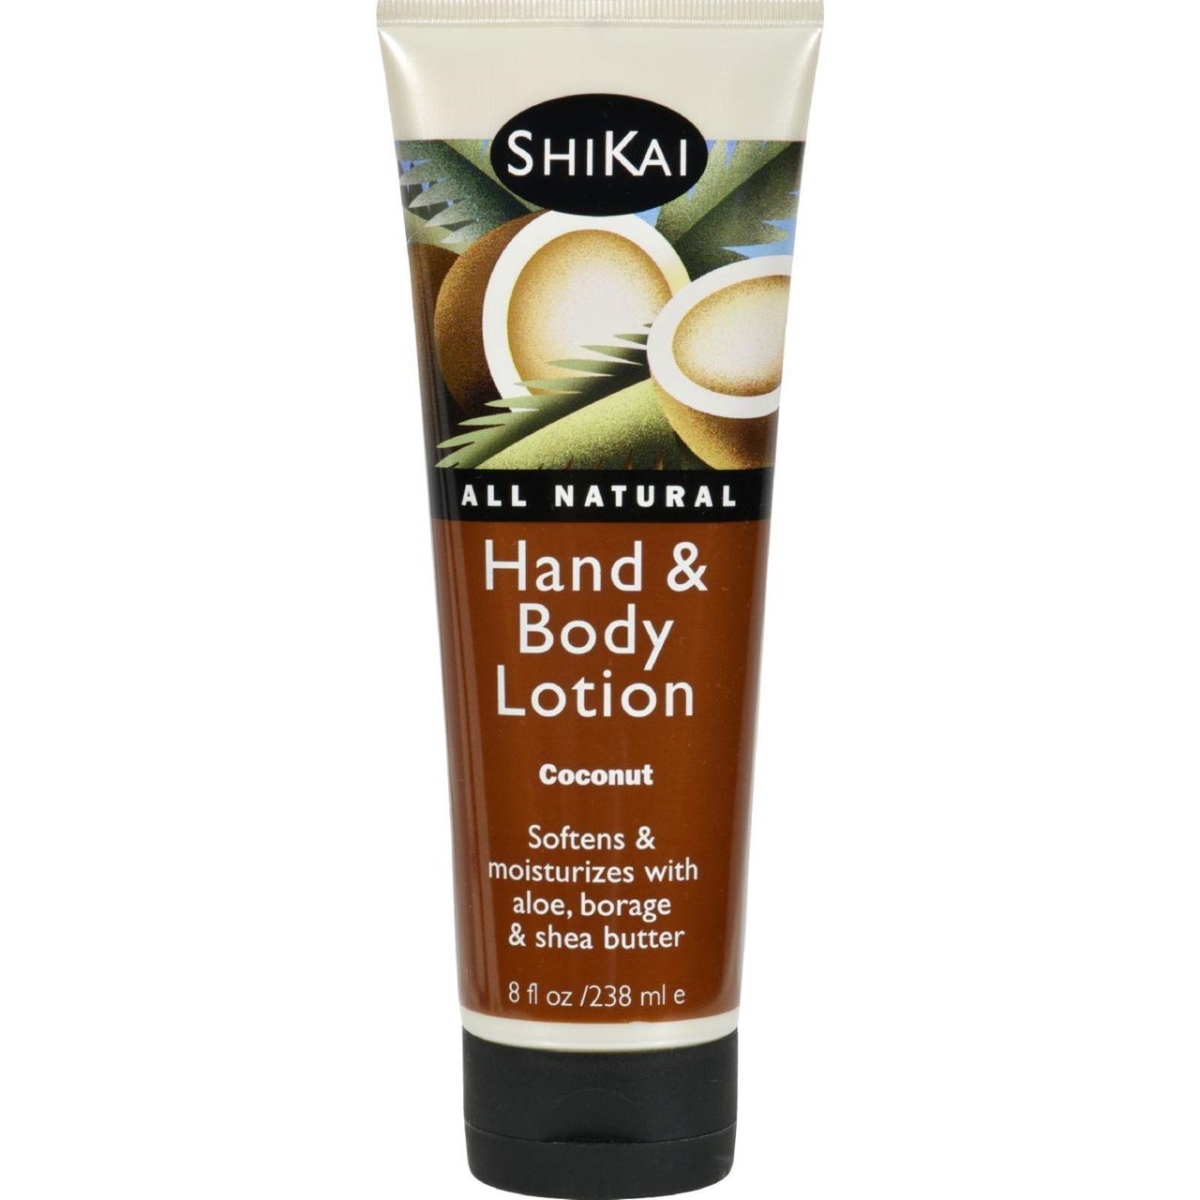 Hg0477836 8 Fl Oz All Natural Hand & Body Lotion - Coconut